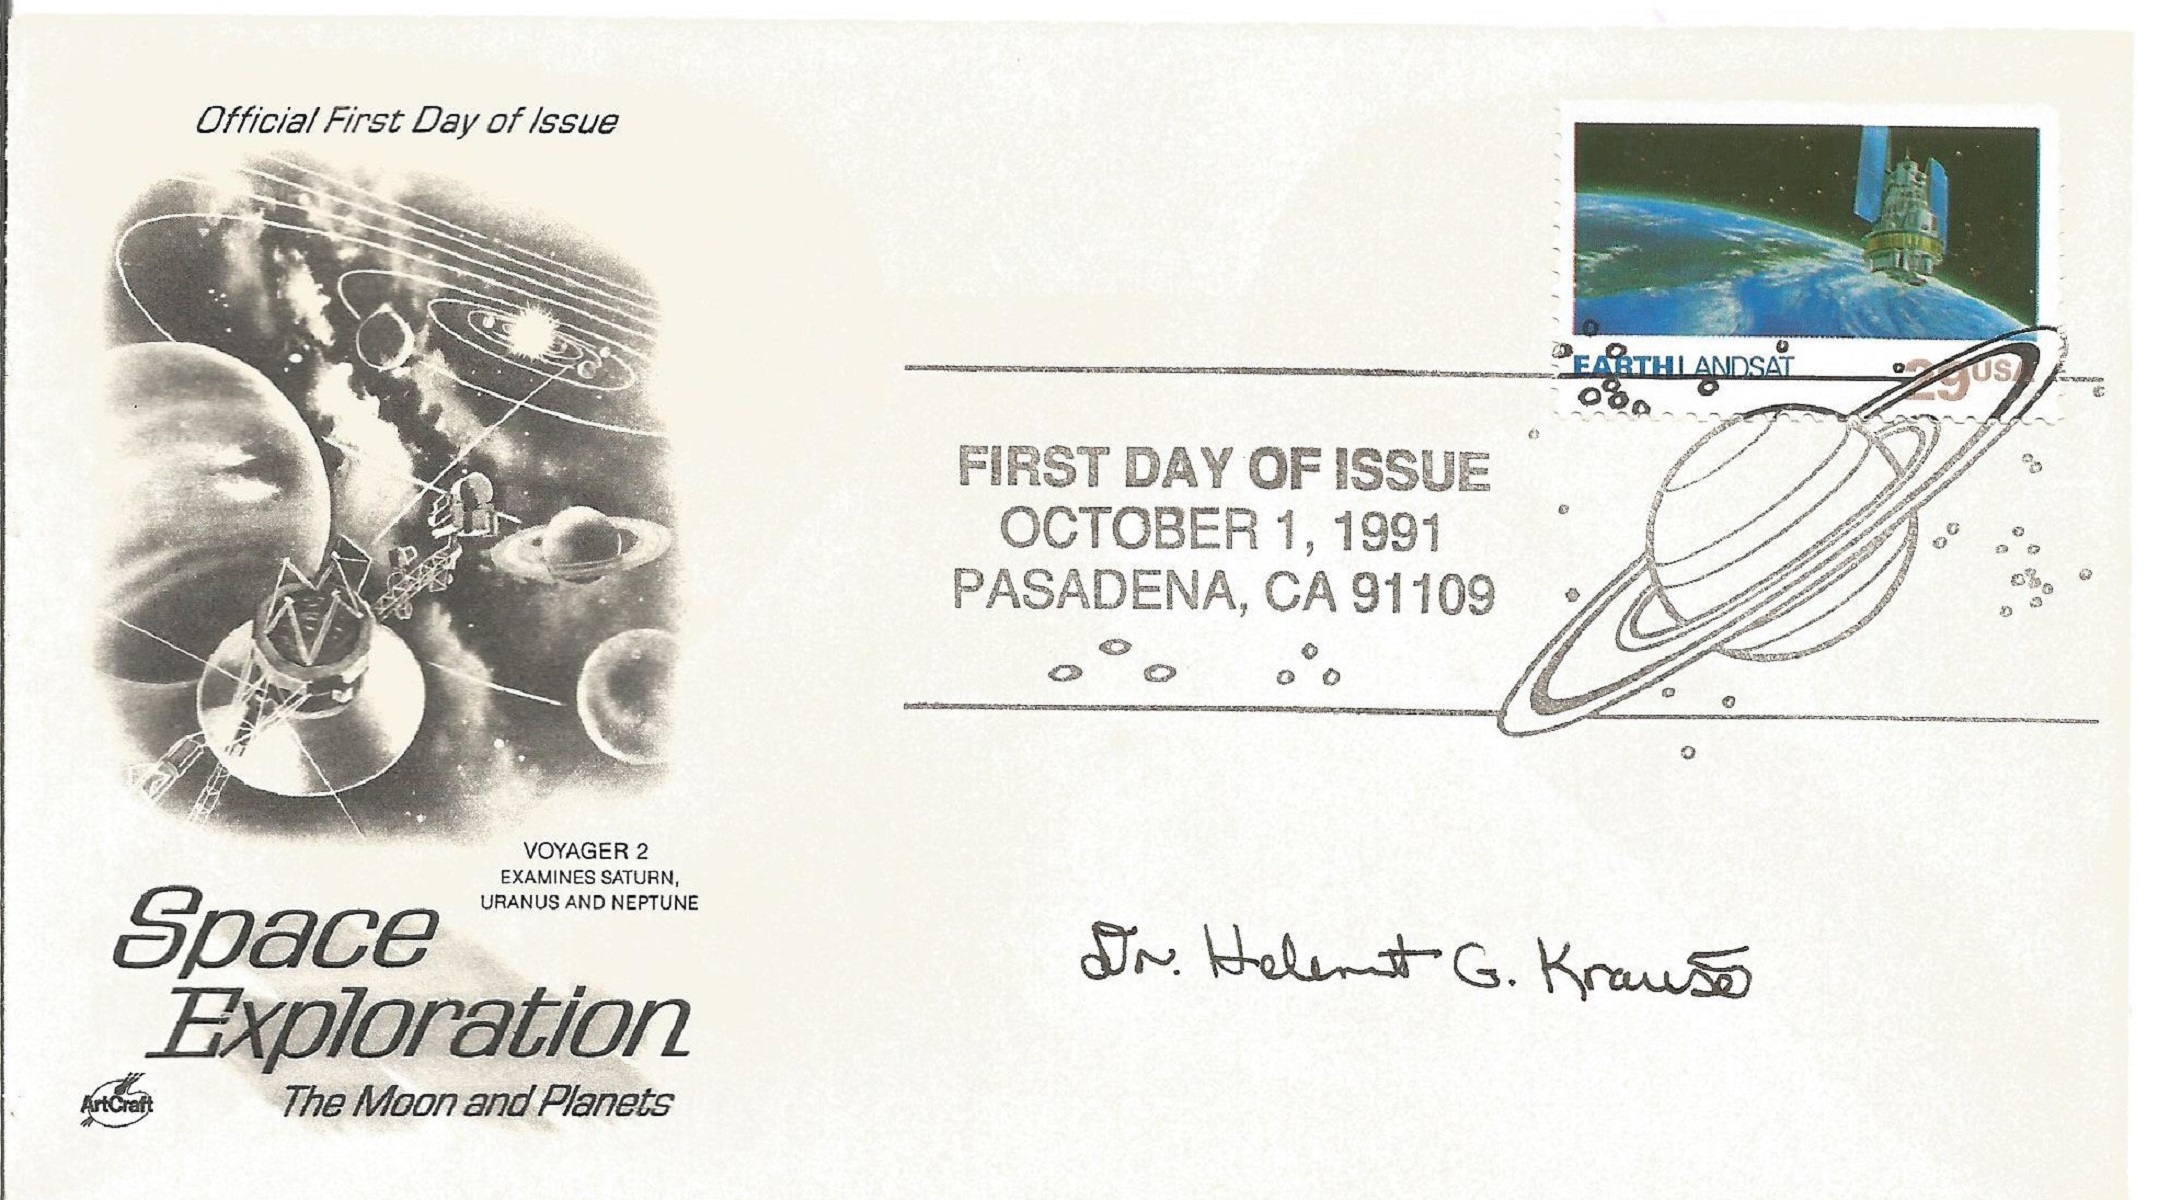 Dr Helmut G Krause signed Space Exploration First Day of Issue Cover illustrated with voyager 2